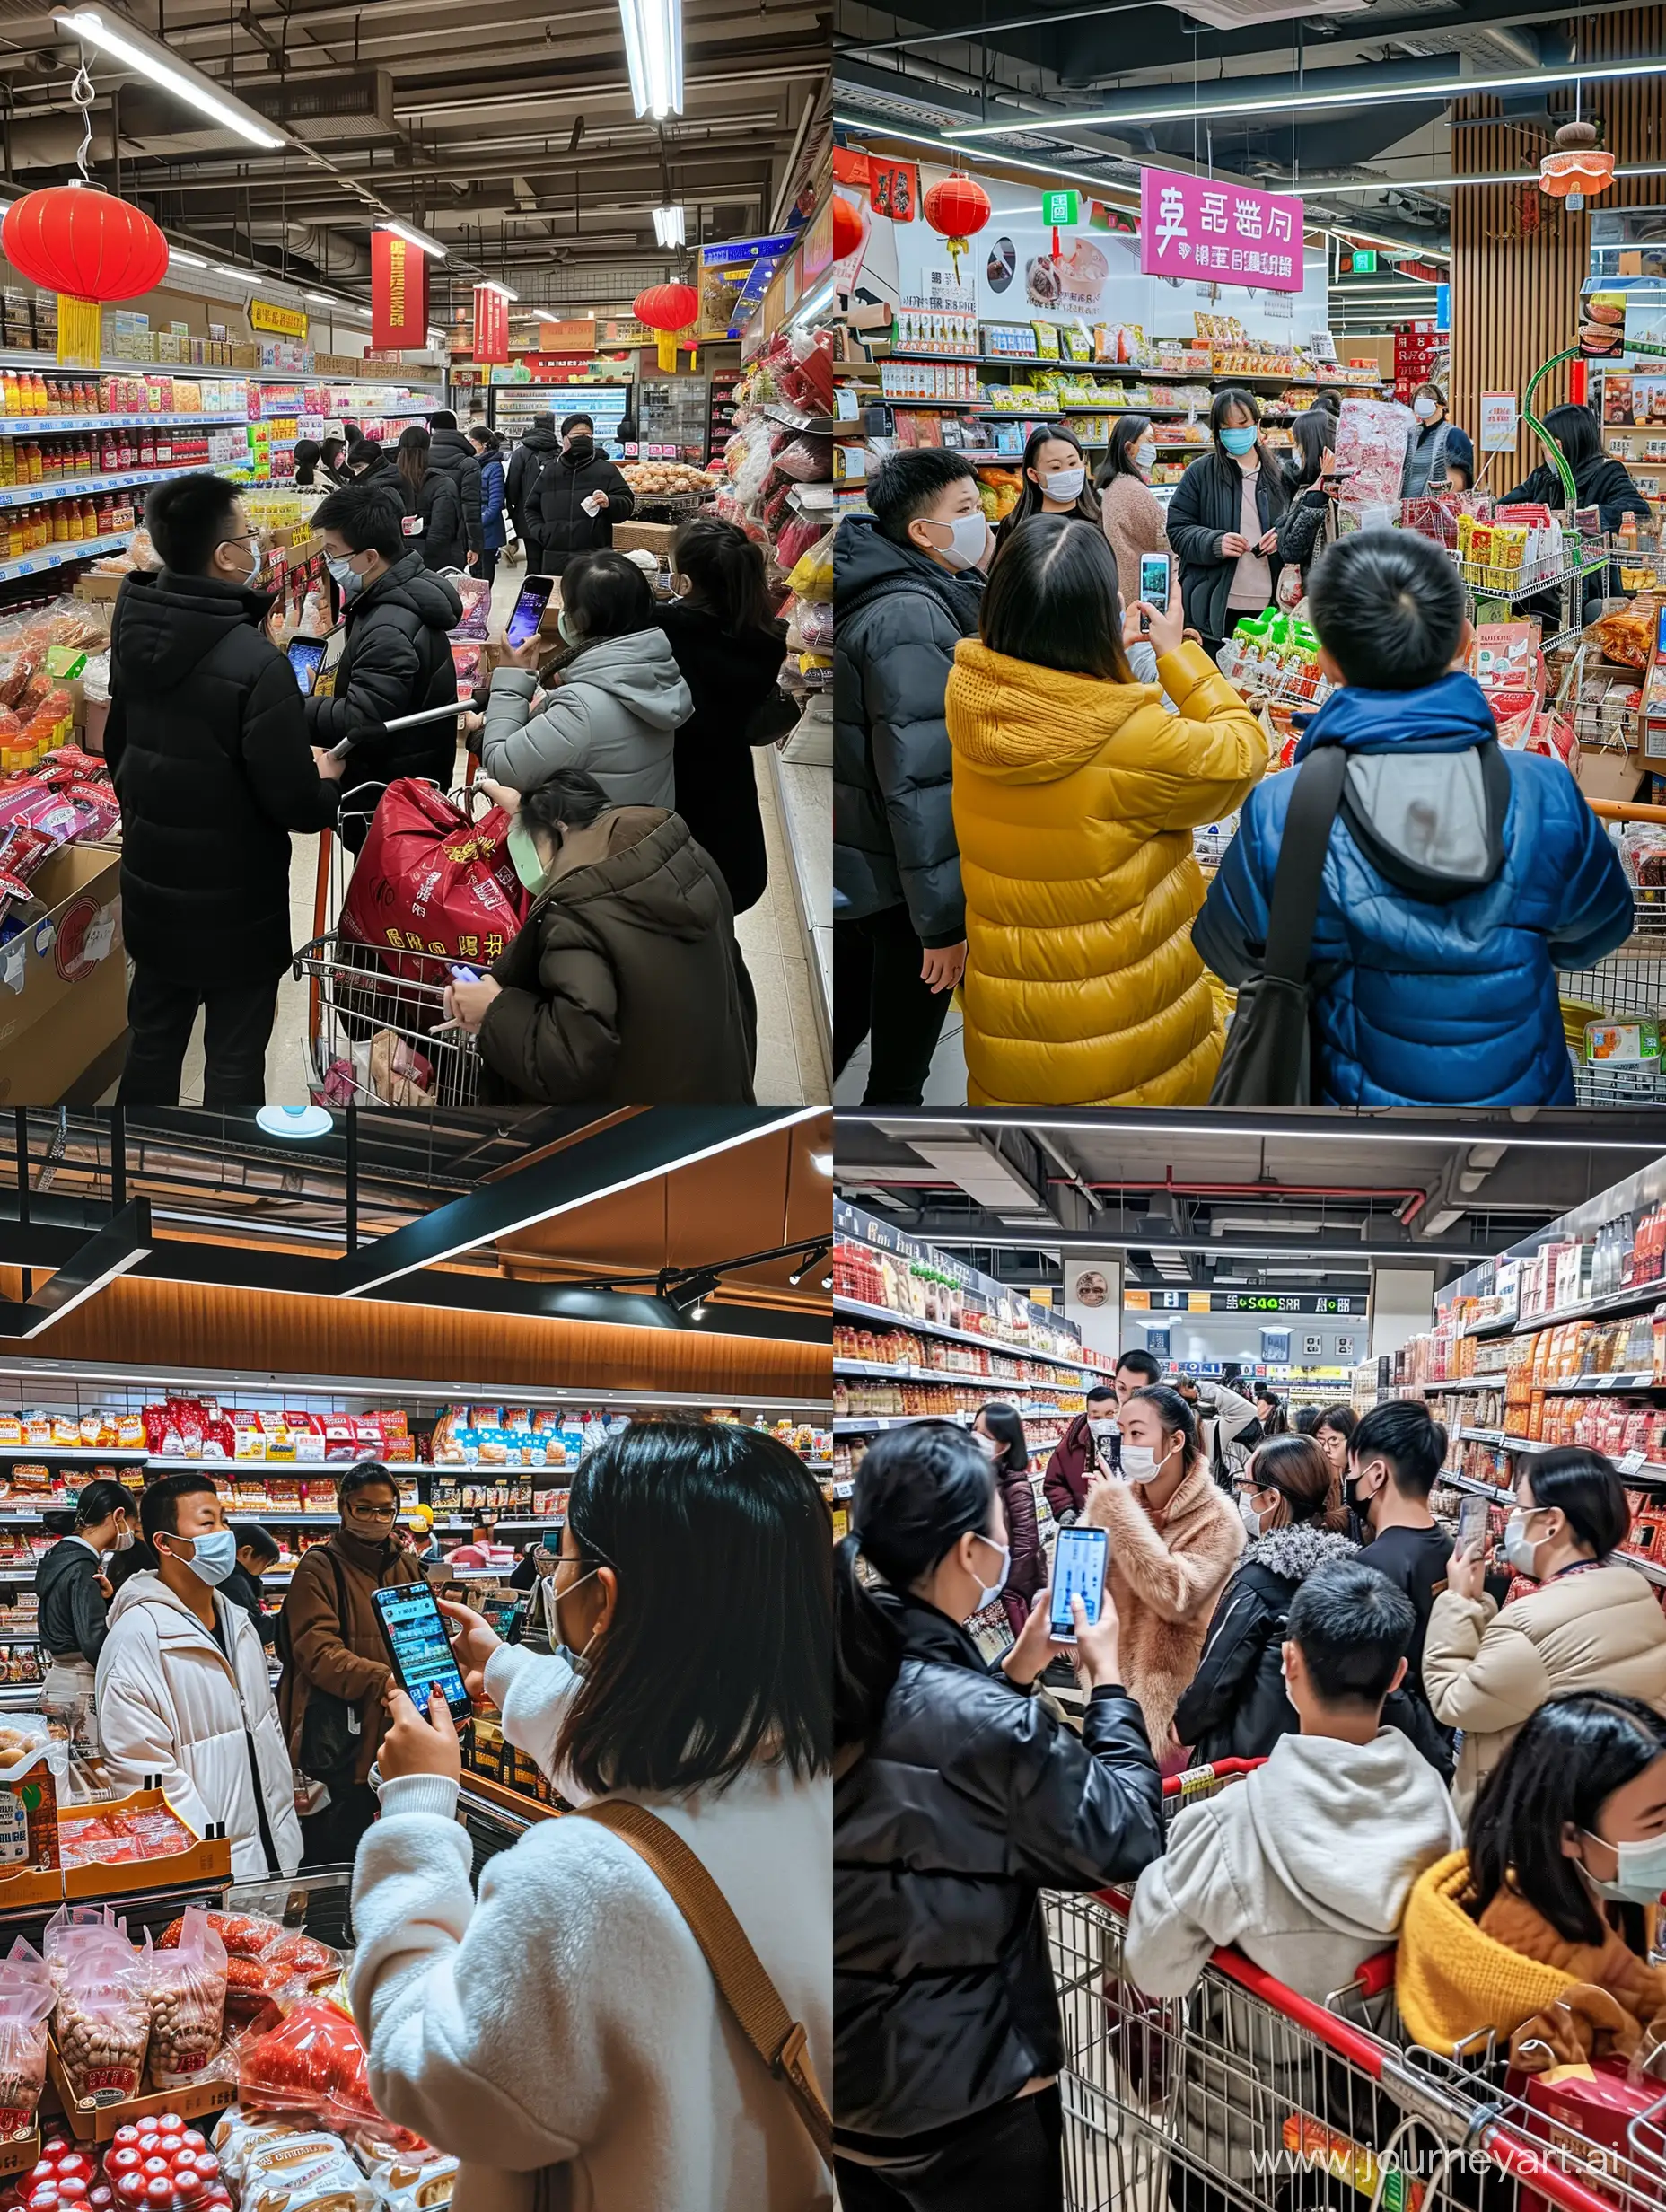 Vibrant-Gathering-at-a-Chinese-Grocery-Store-Weibo-Snapshot-2023